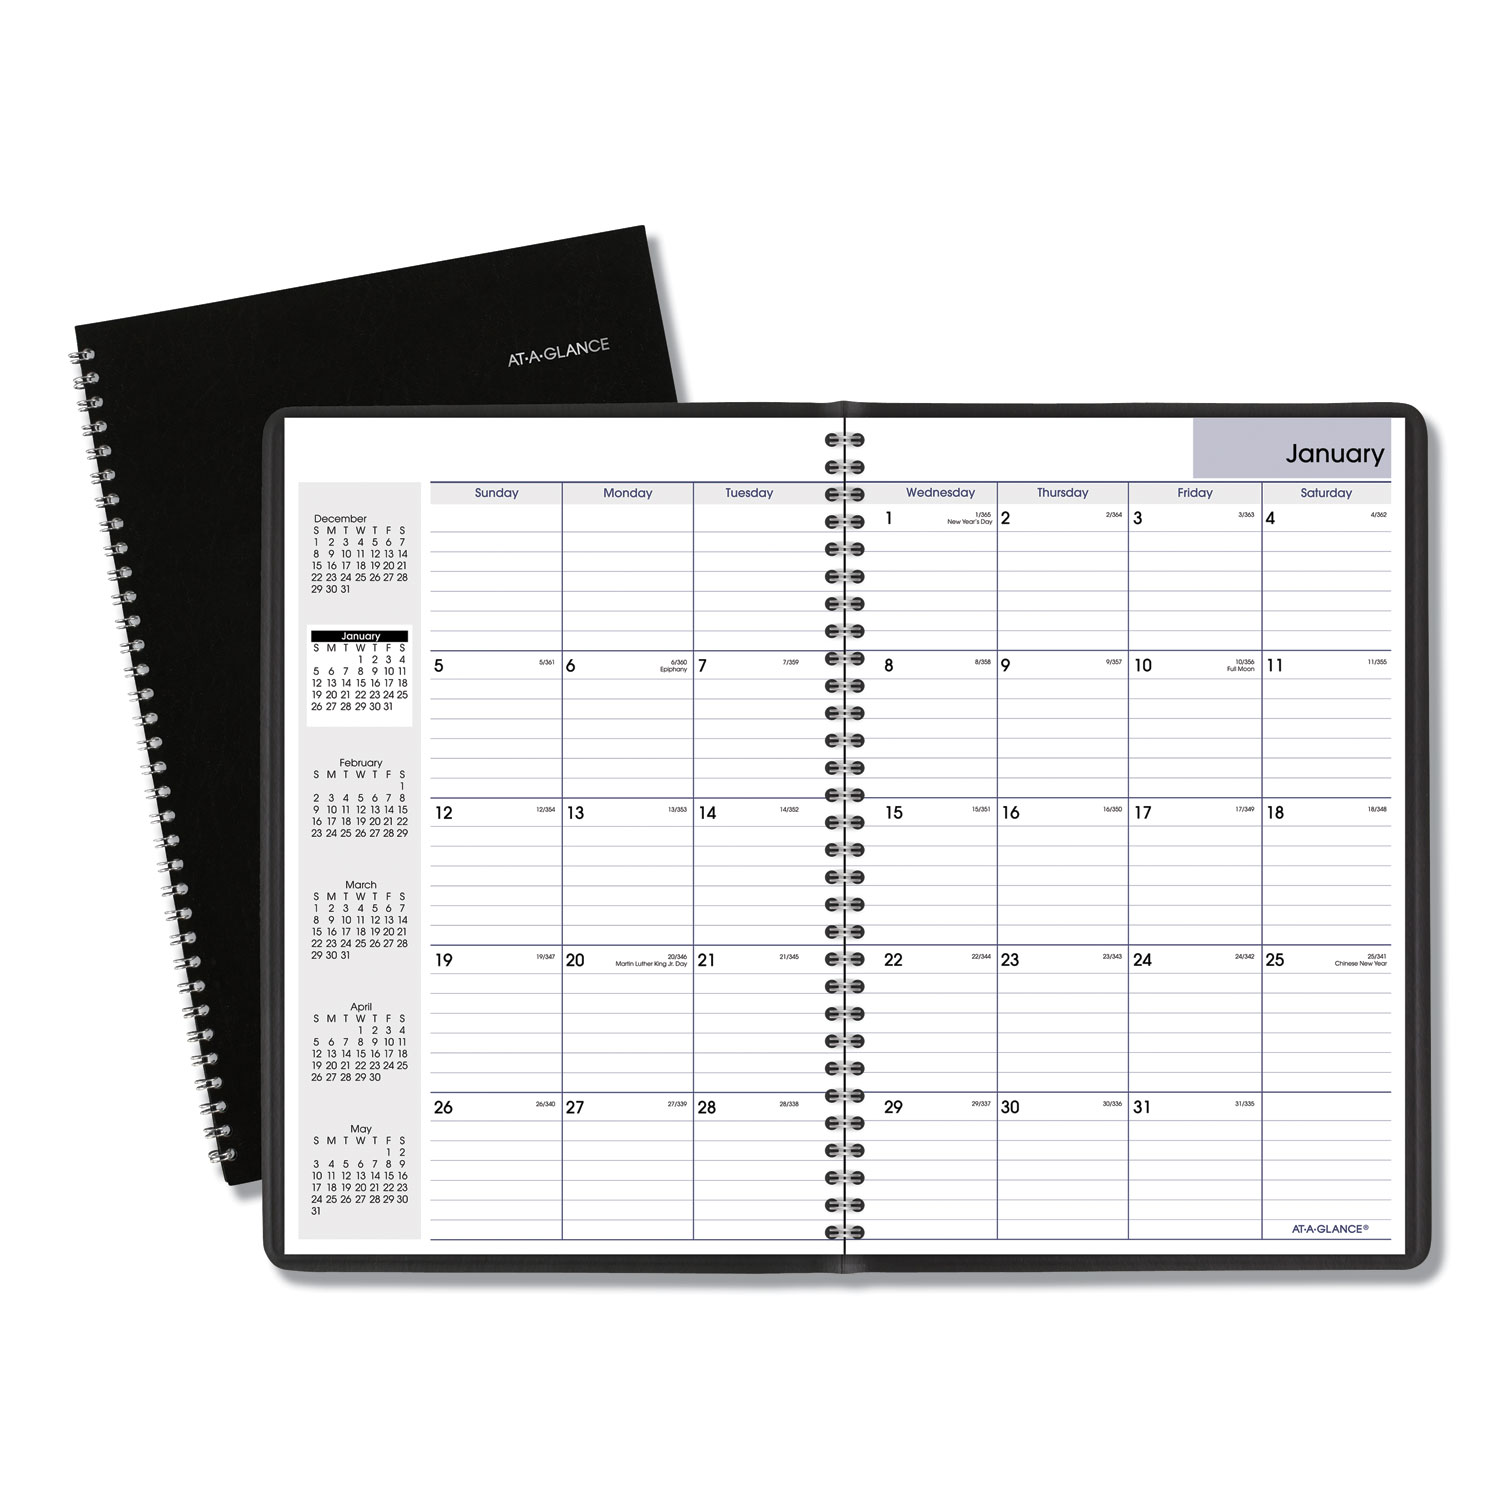  AT-A-GLANCE SK2-00 Monthly Planner, 11 7/8 x 7 7/8, Black Two-Piece Cover, 2019-2020 (AAGSK200) 